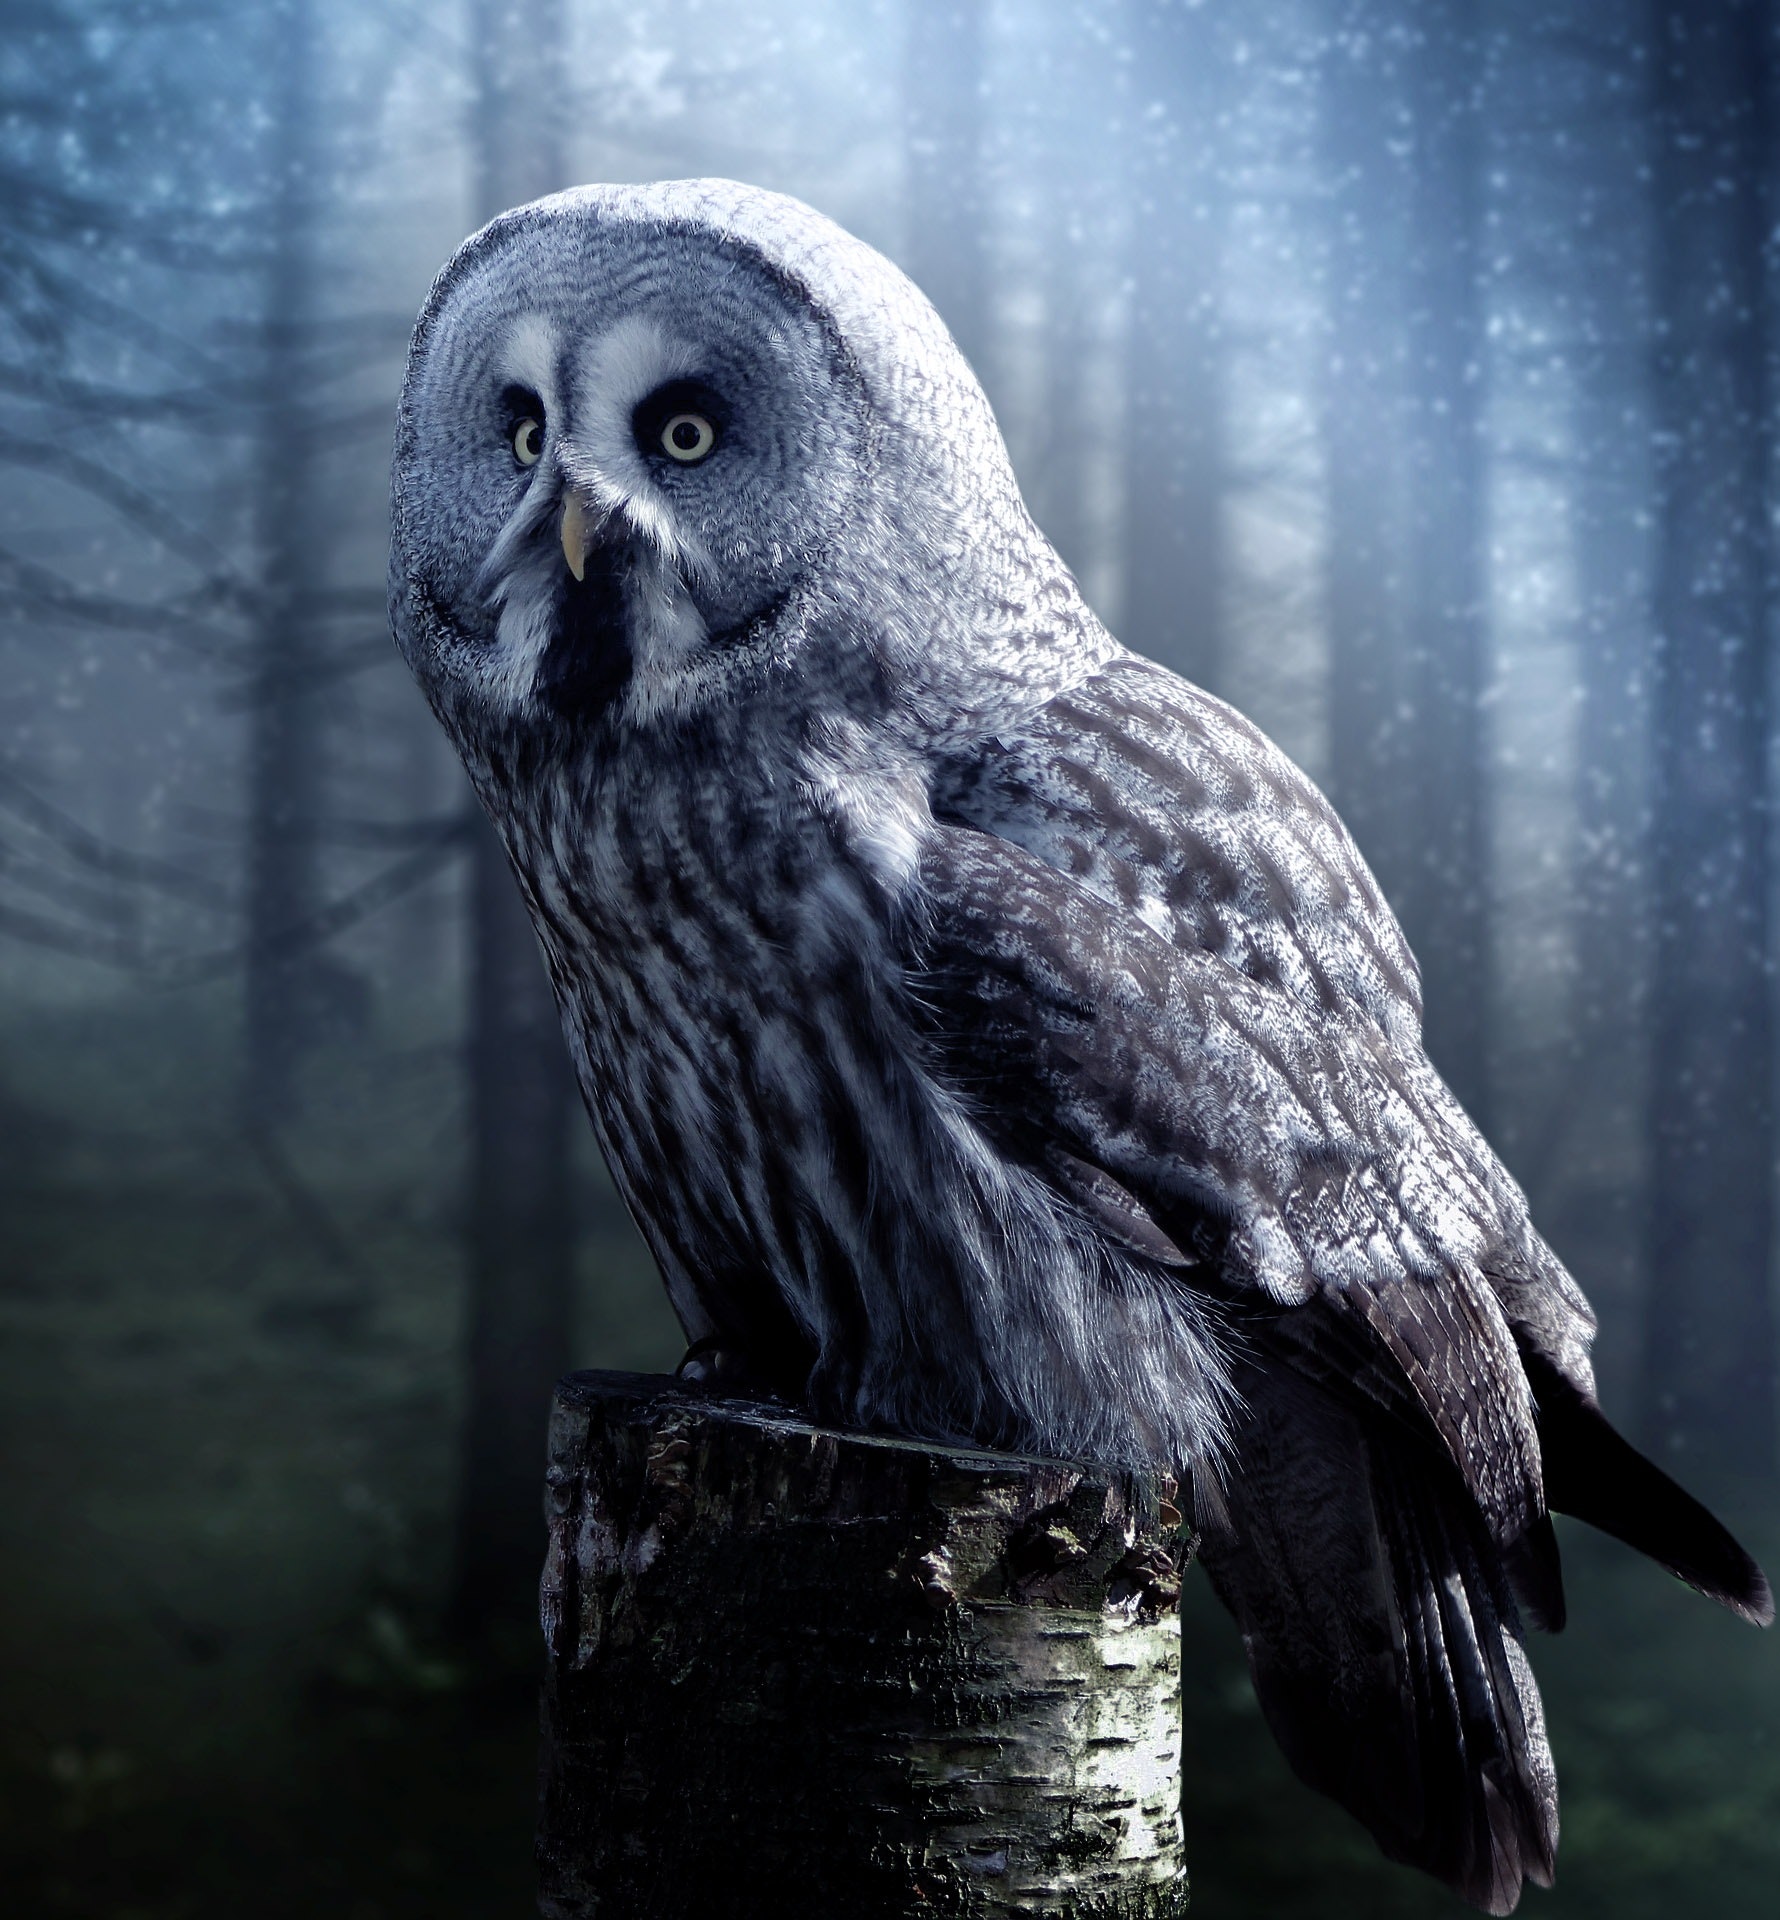 The Biblical Meaning of Owls in Dreams